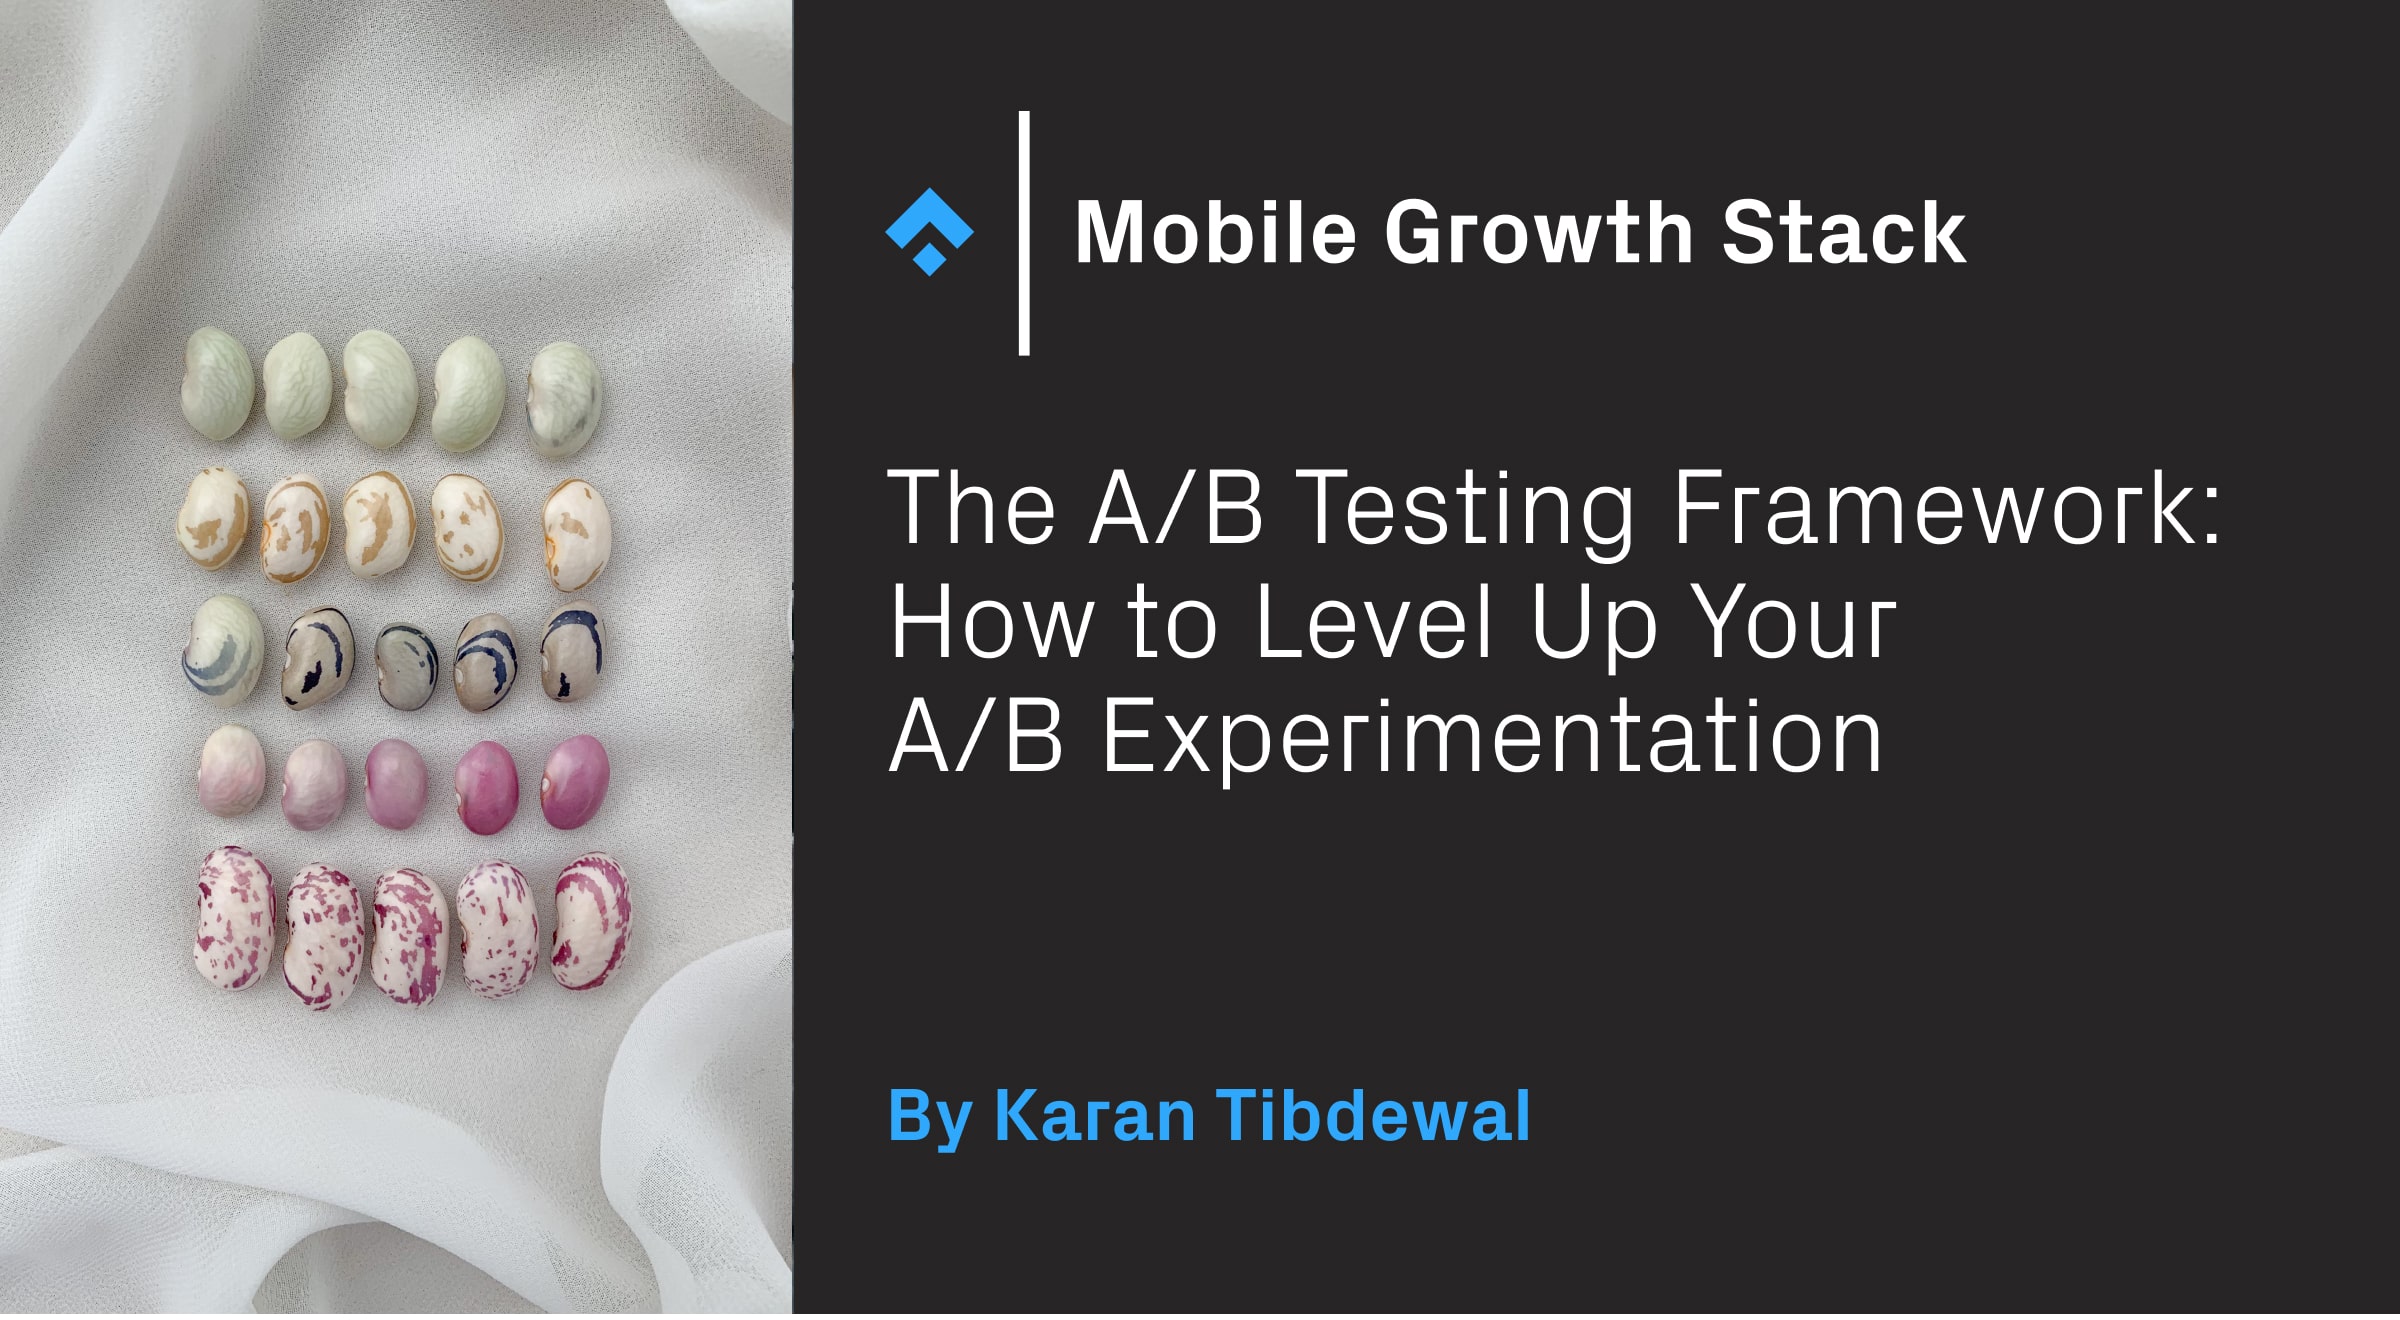 The A/B Testing Framework: How to Level Up Your A/B Experimentation